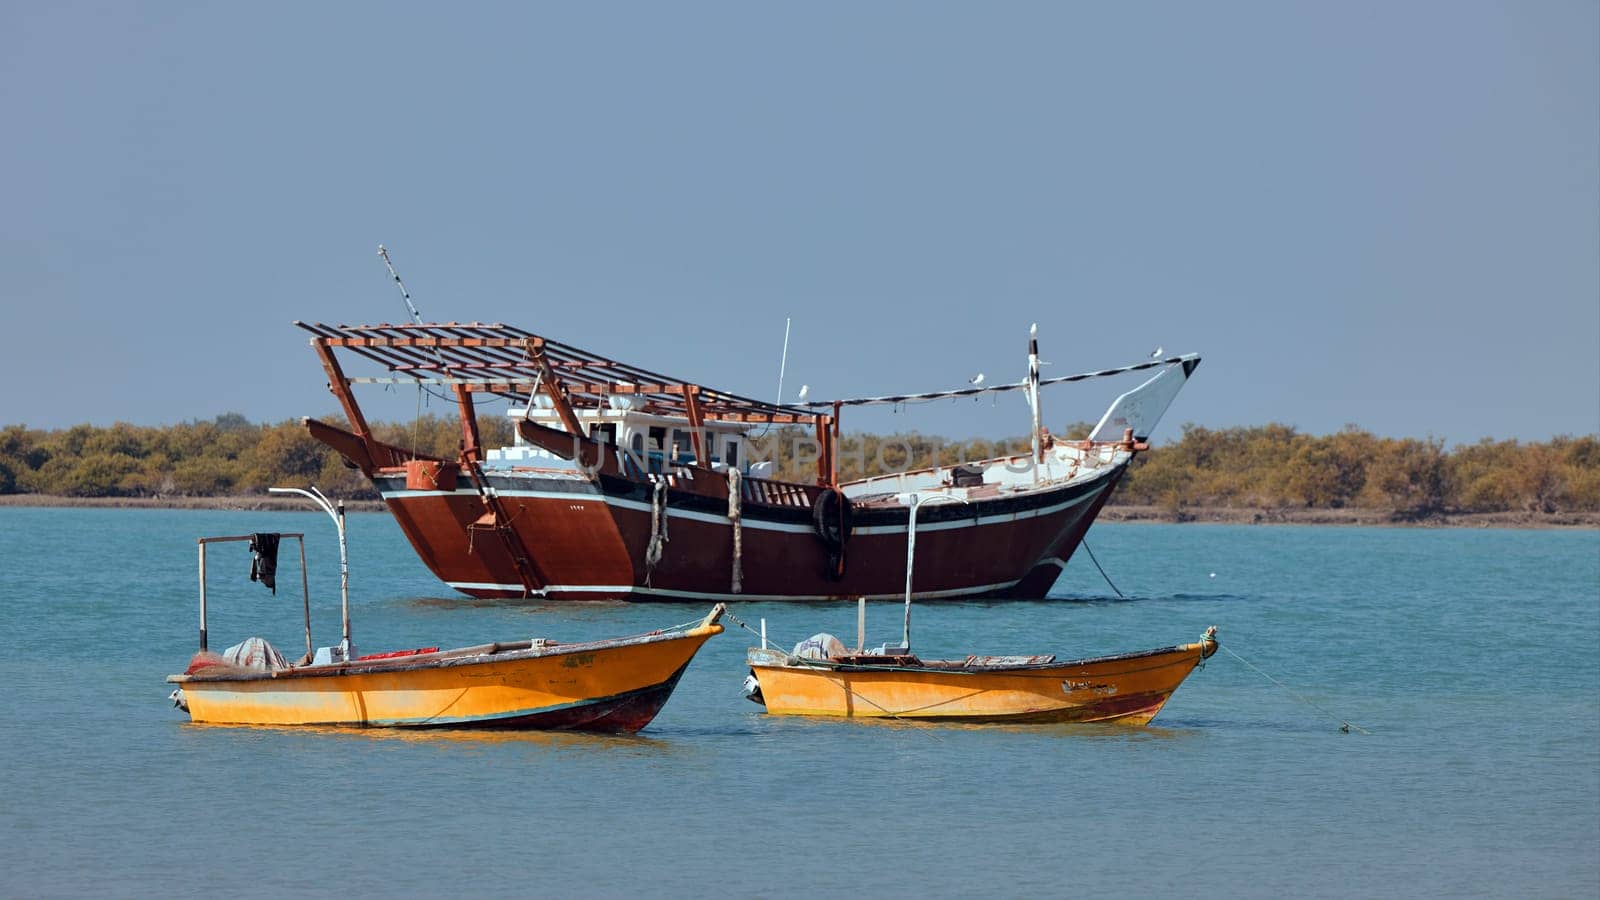 Traditional Dhow old wooden boat in the harbor of Iranian Qeshm Island. Tradition Lenj Fishing Boat in Qeshm Island in Southern Iran. Old wooden stealth smuggler's ship by EvgeniyQW